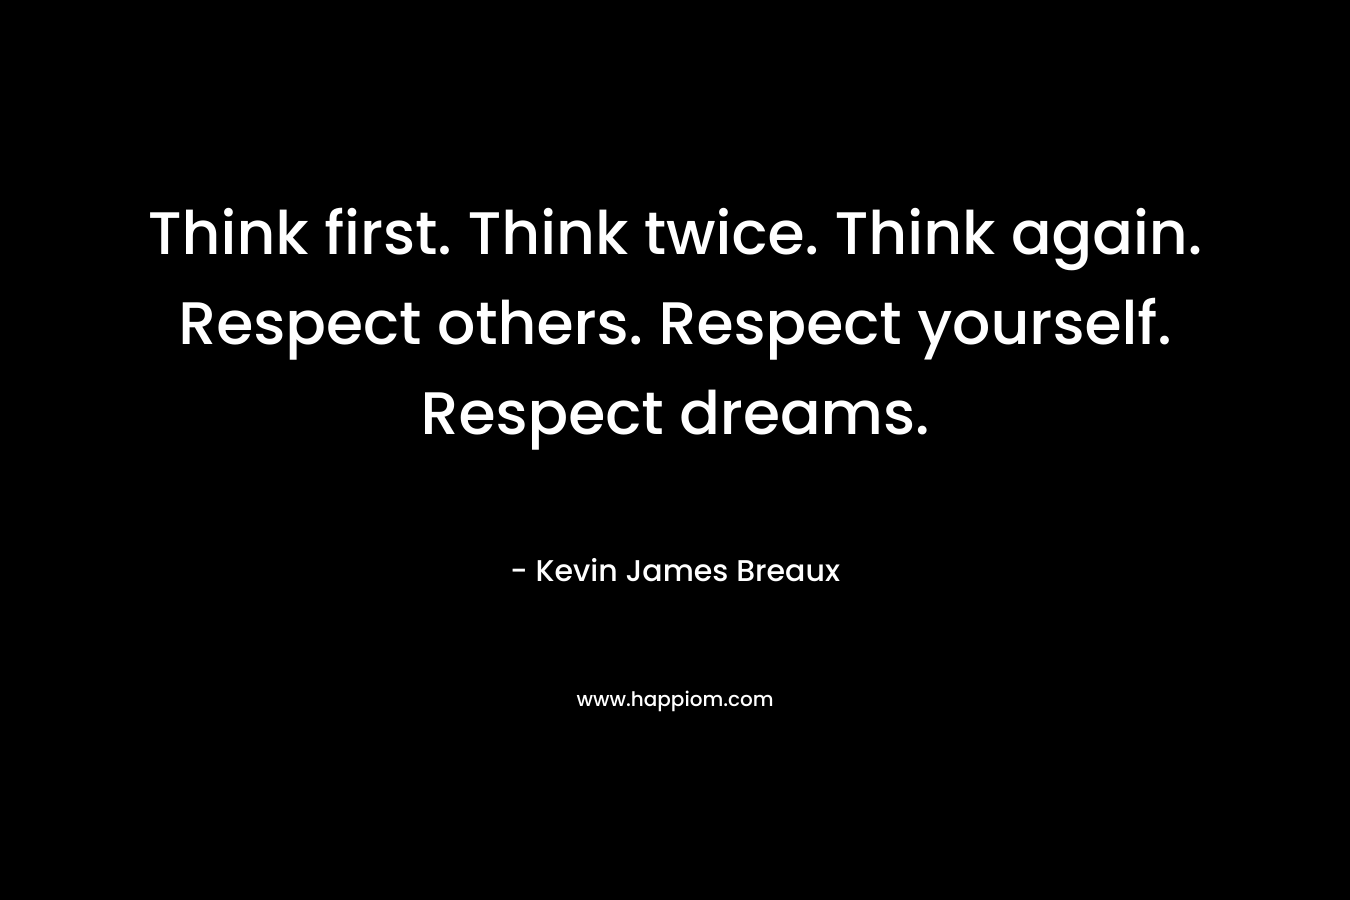 Think first. Think twice. Think again. Respect others. Respect yourself. Respect dreams.